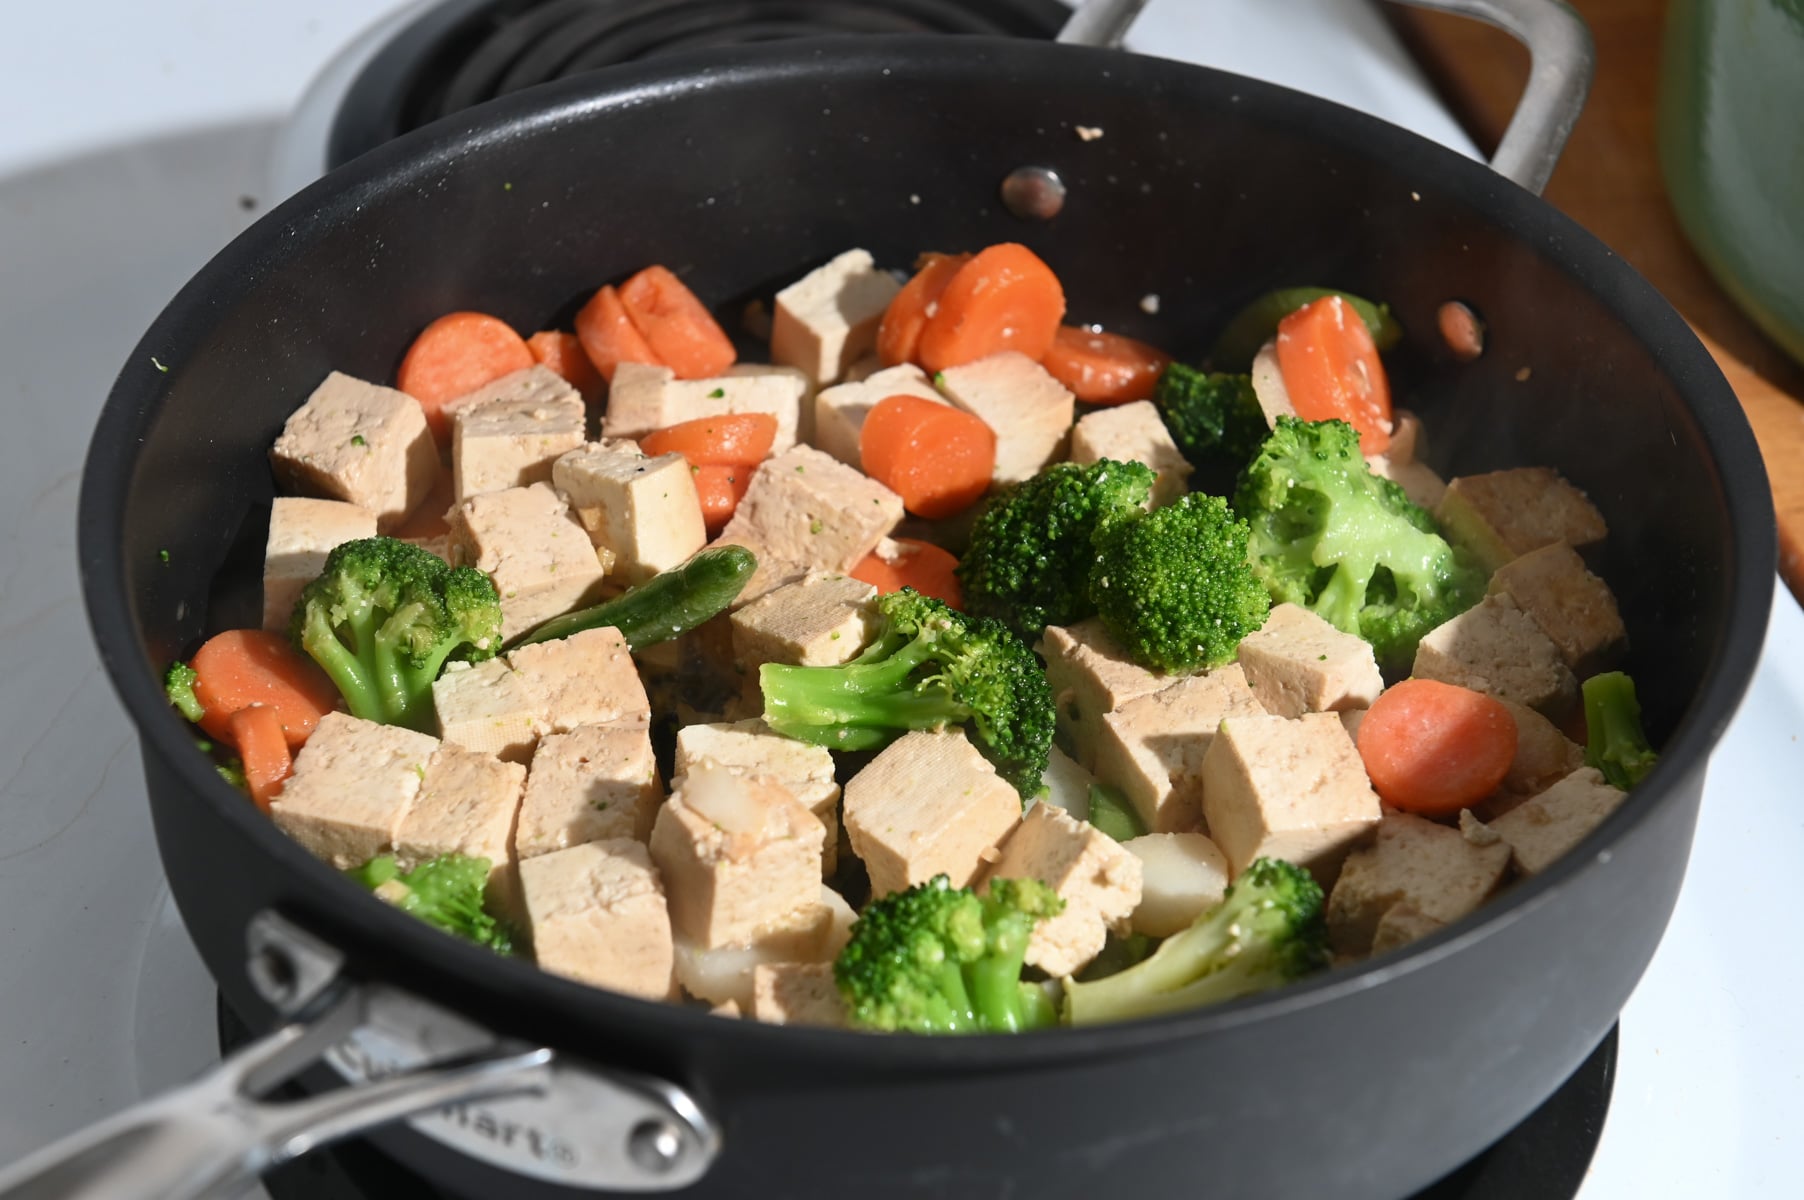 Diced tofu and vegetables in a black skillet.